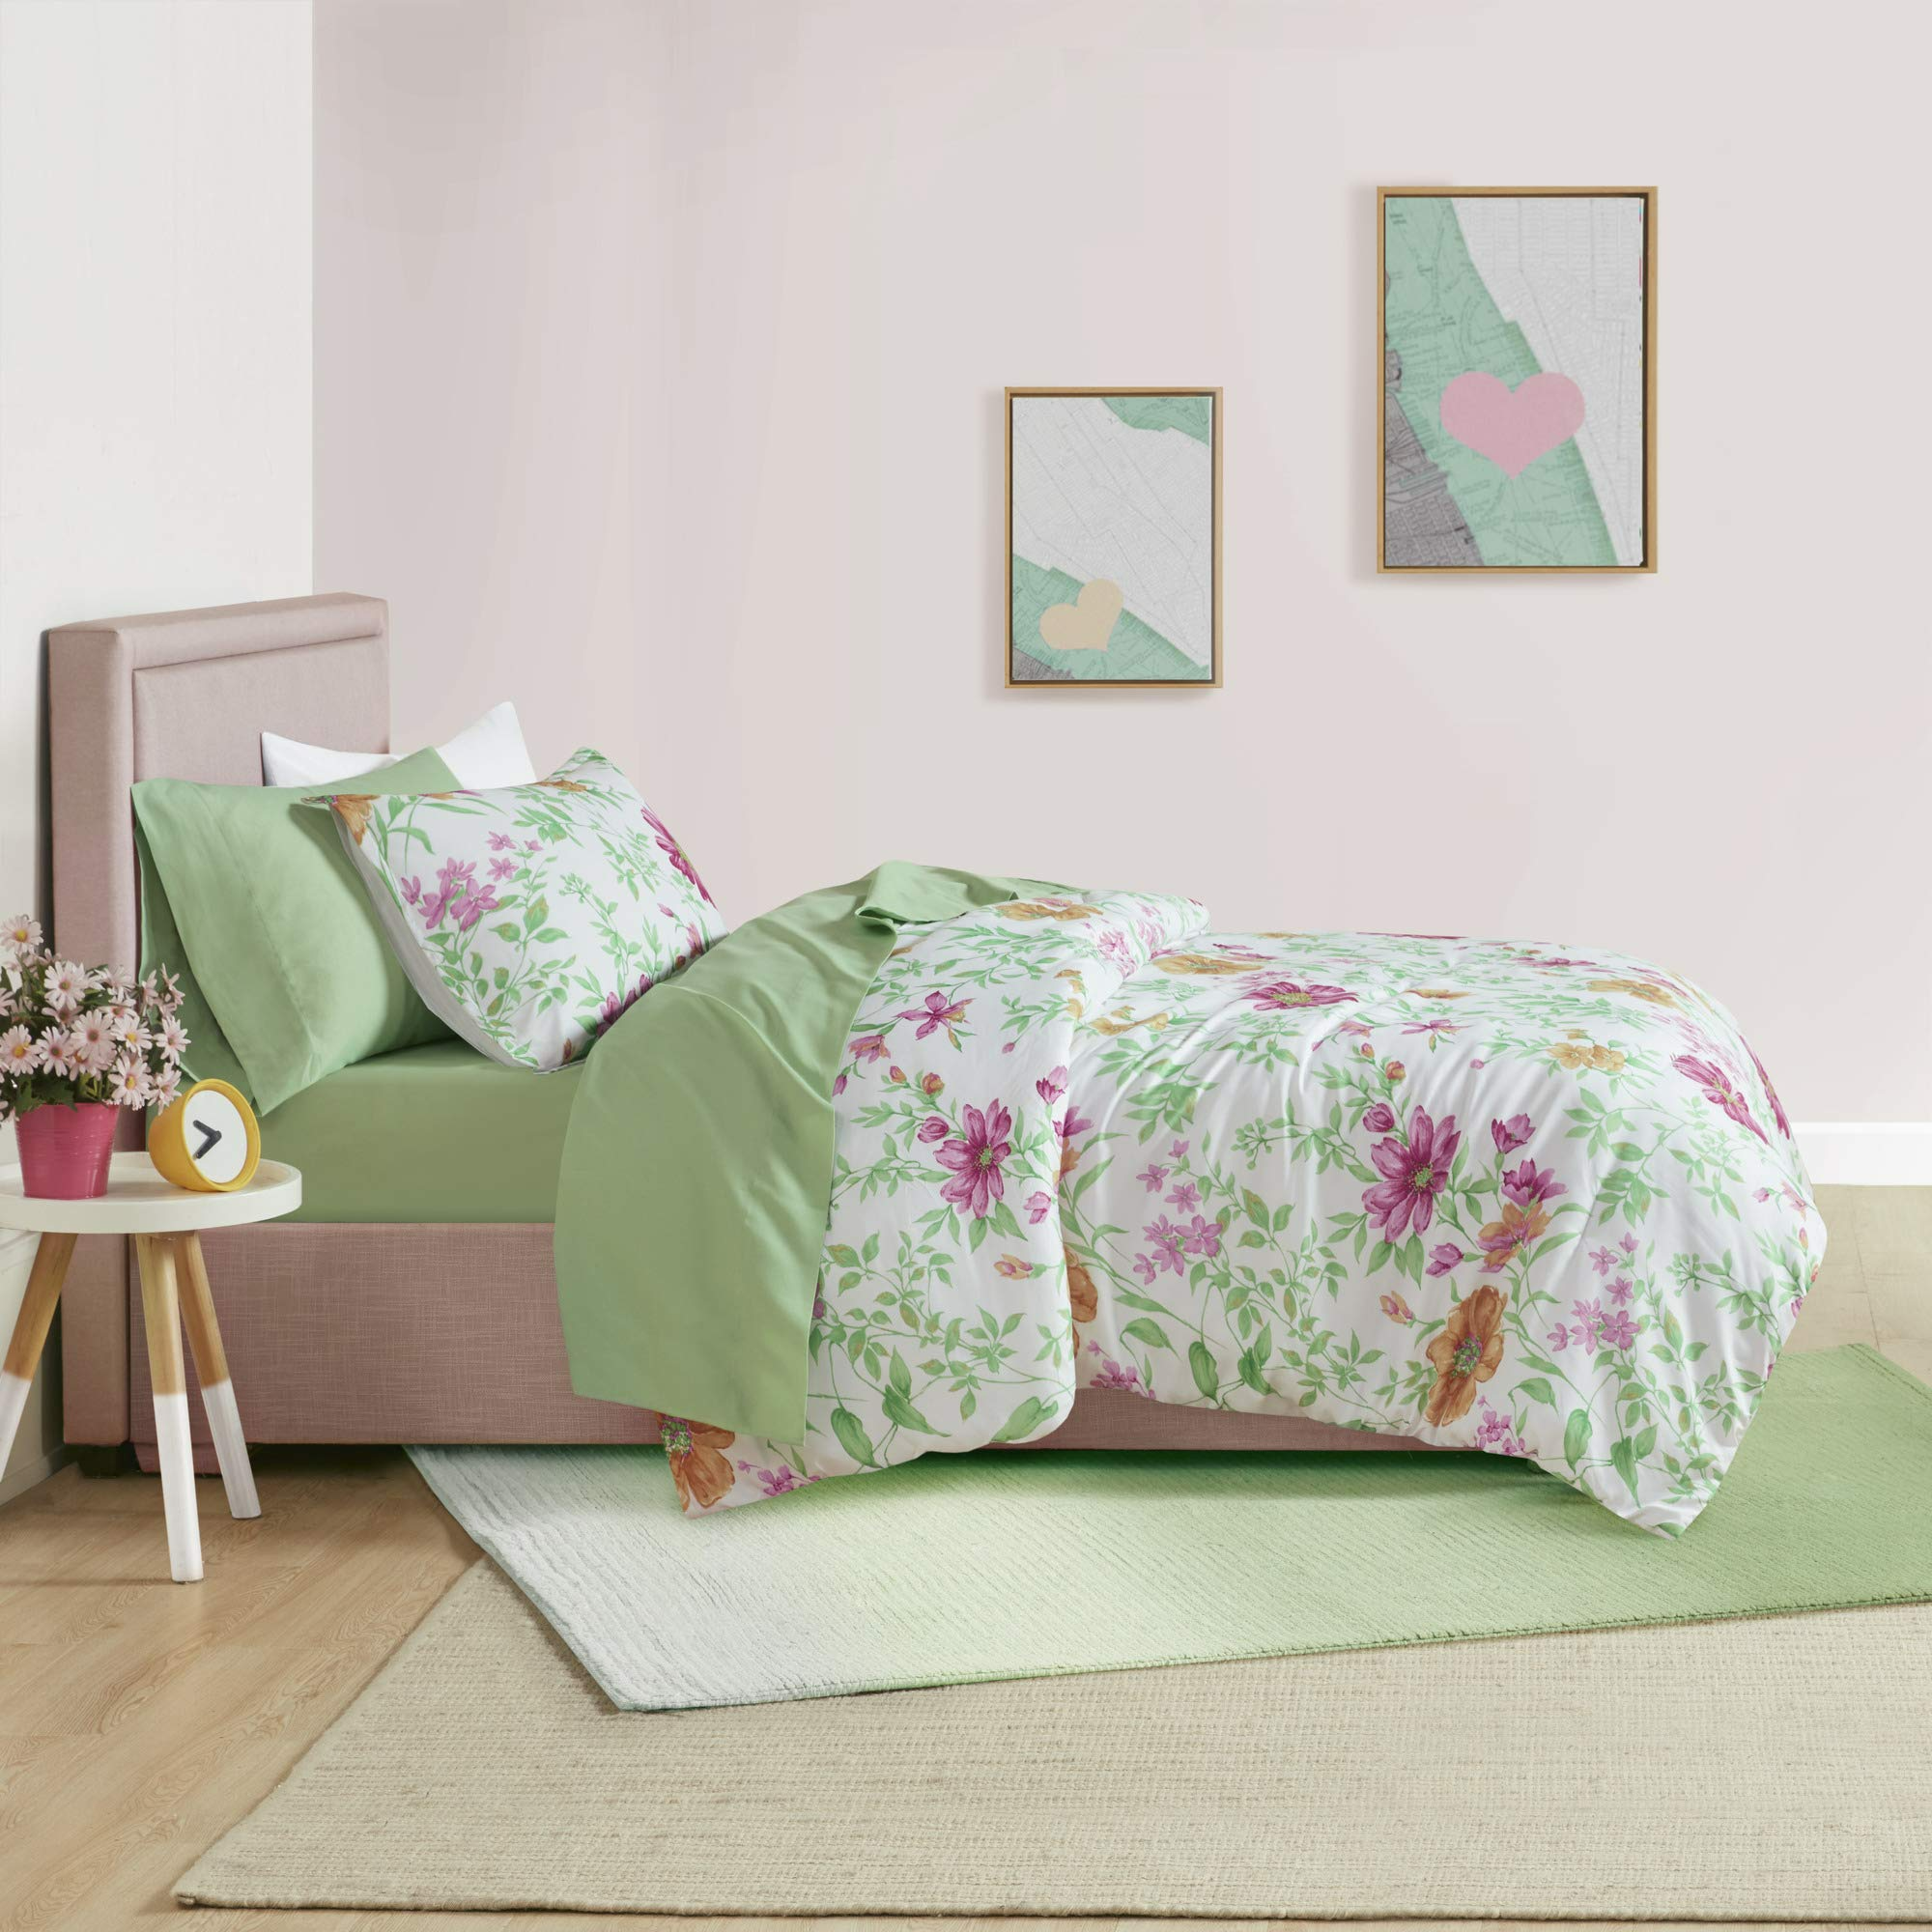 Comfort Spaces 9-Pieces Queen Bed in a Bag Comforter Sets Microfiber Down Alternative Daisies Green with Sheet Set and Side Pockets - image 5 of 12